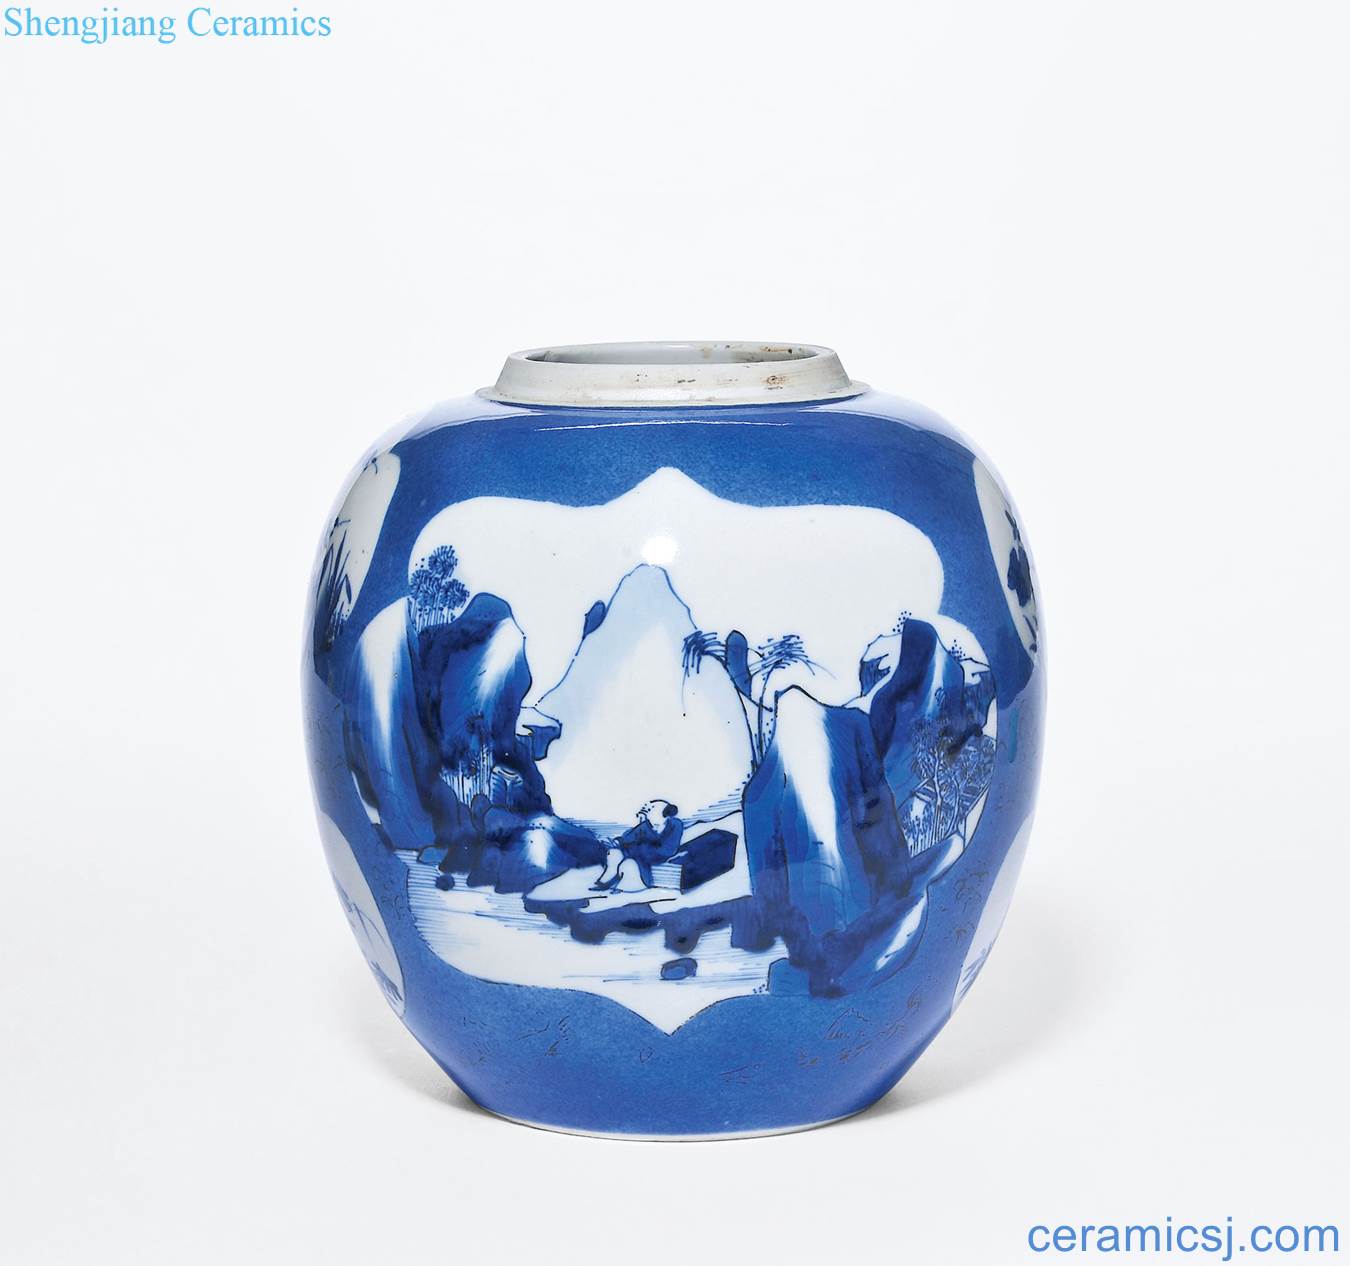 The qing emperor kangxi is aspersed blue glaze medallion scenery character flower-and-bird grain tank